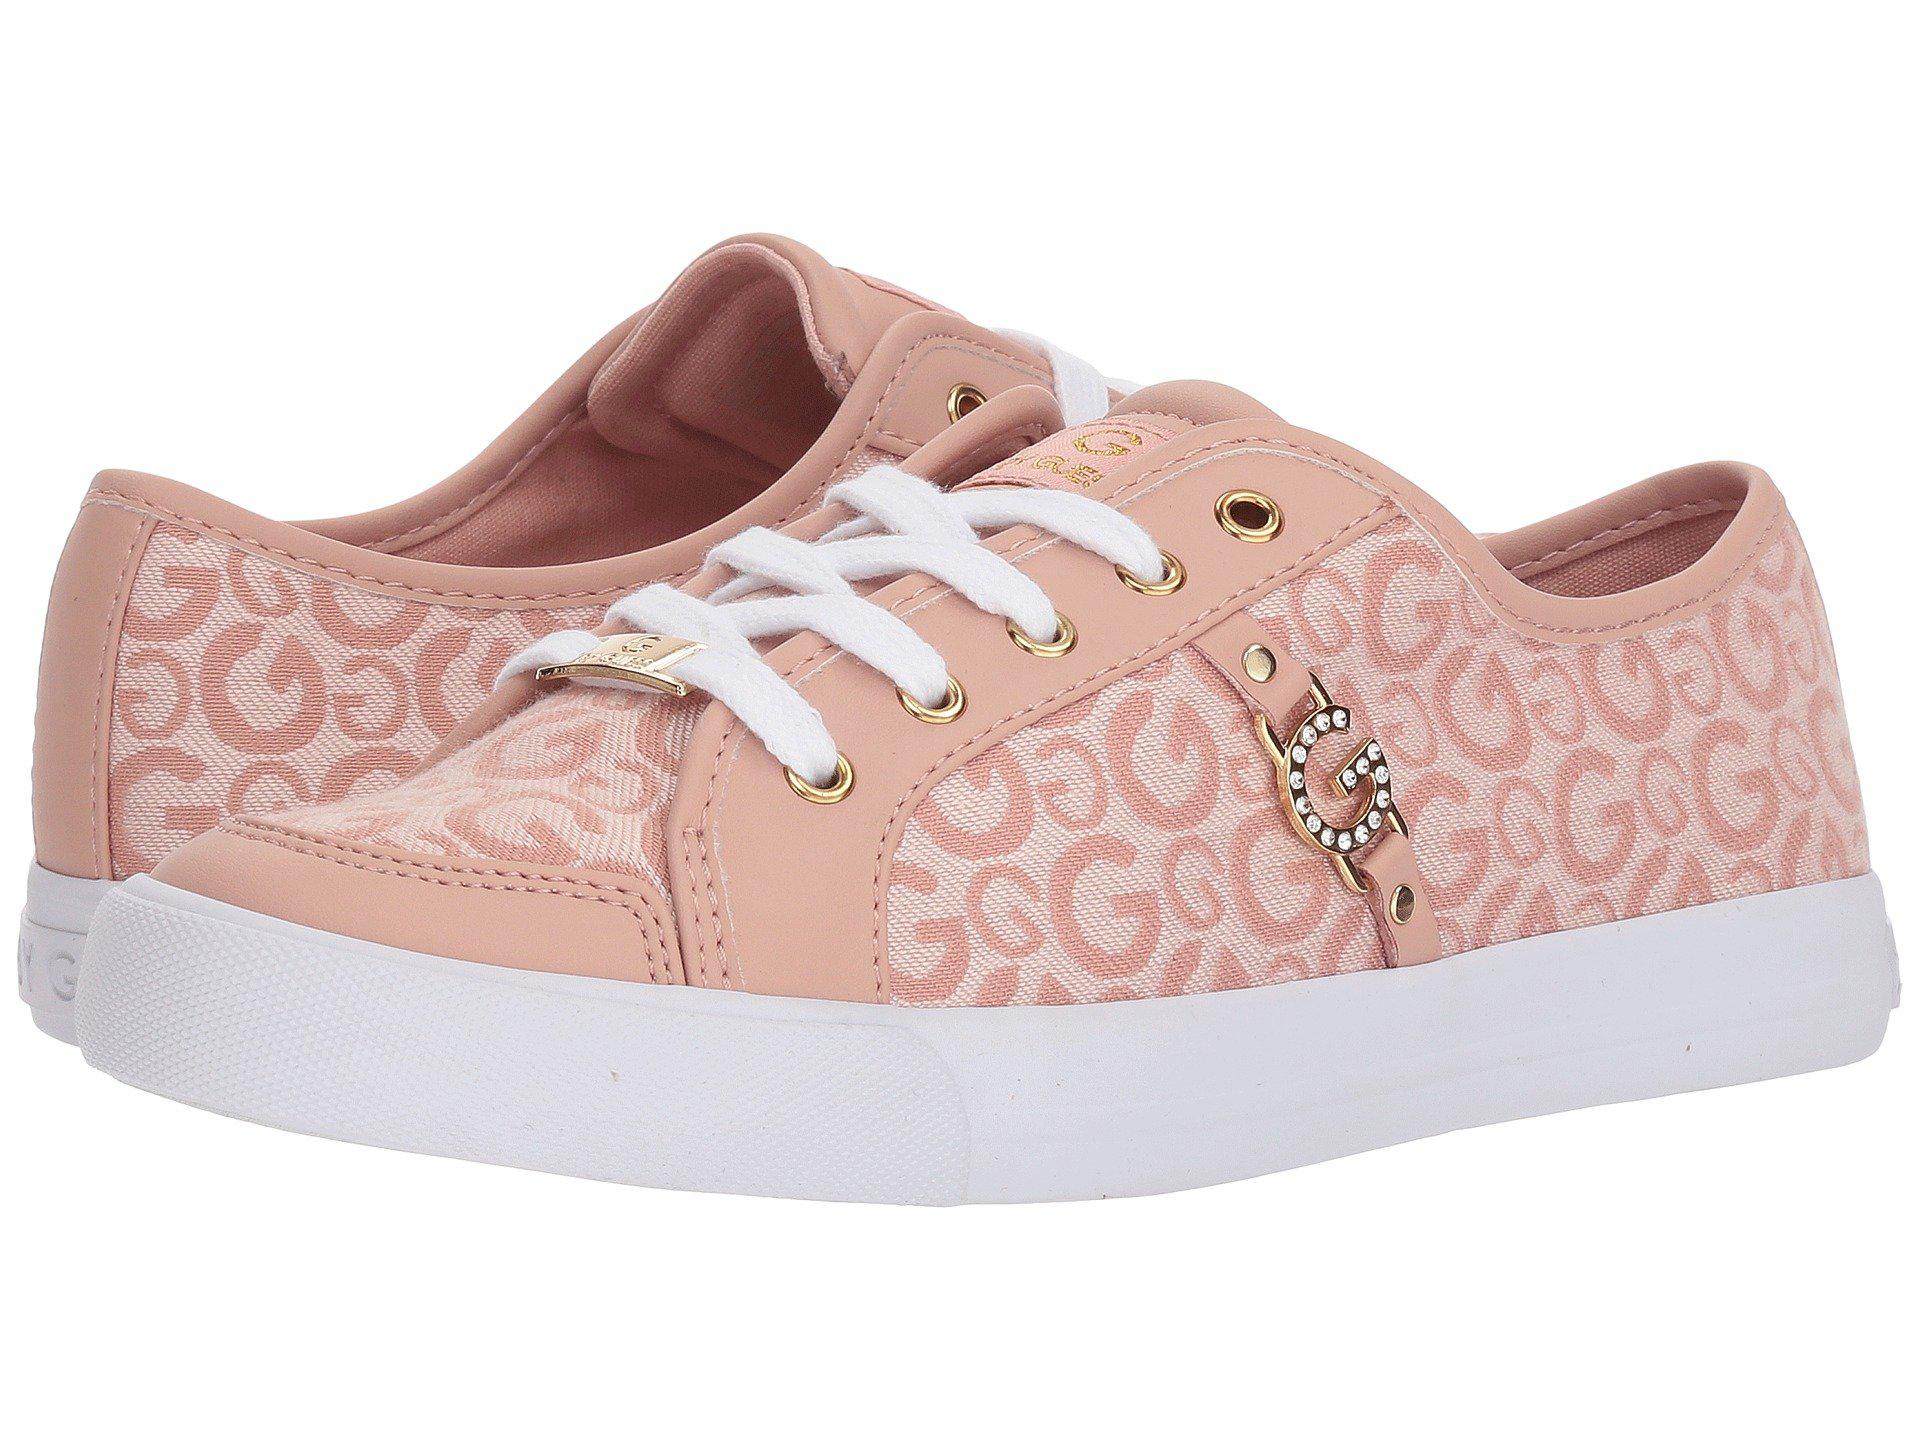 G by Guess Rubber Baylee2 in Light Pink 